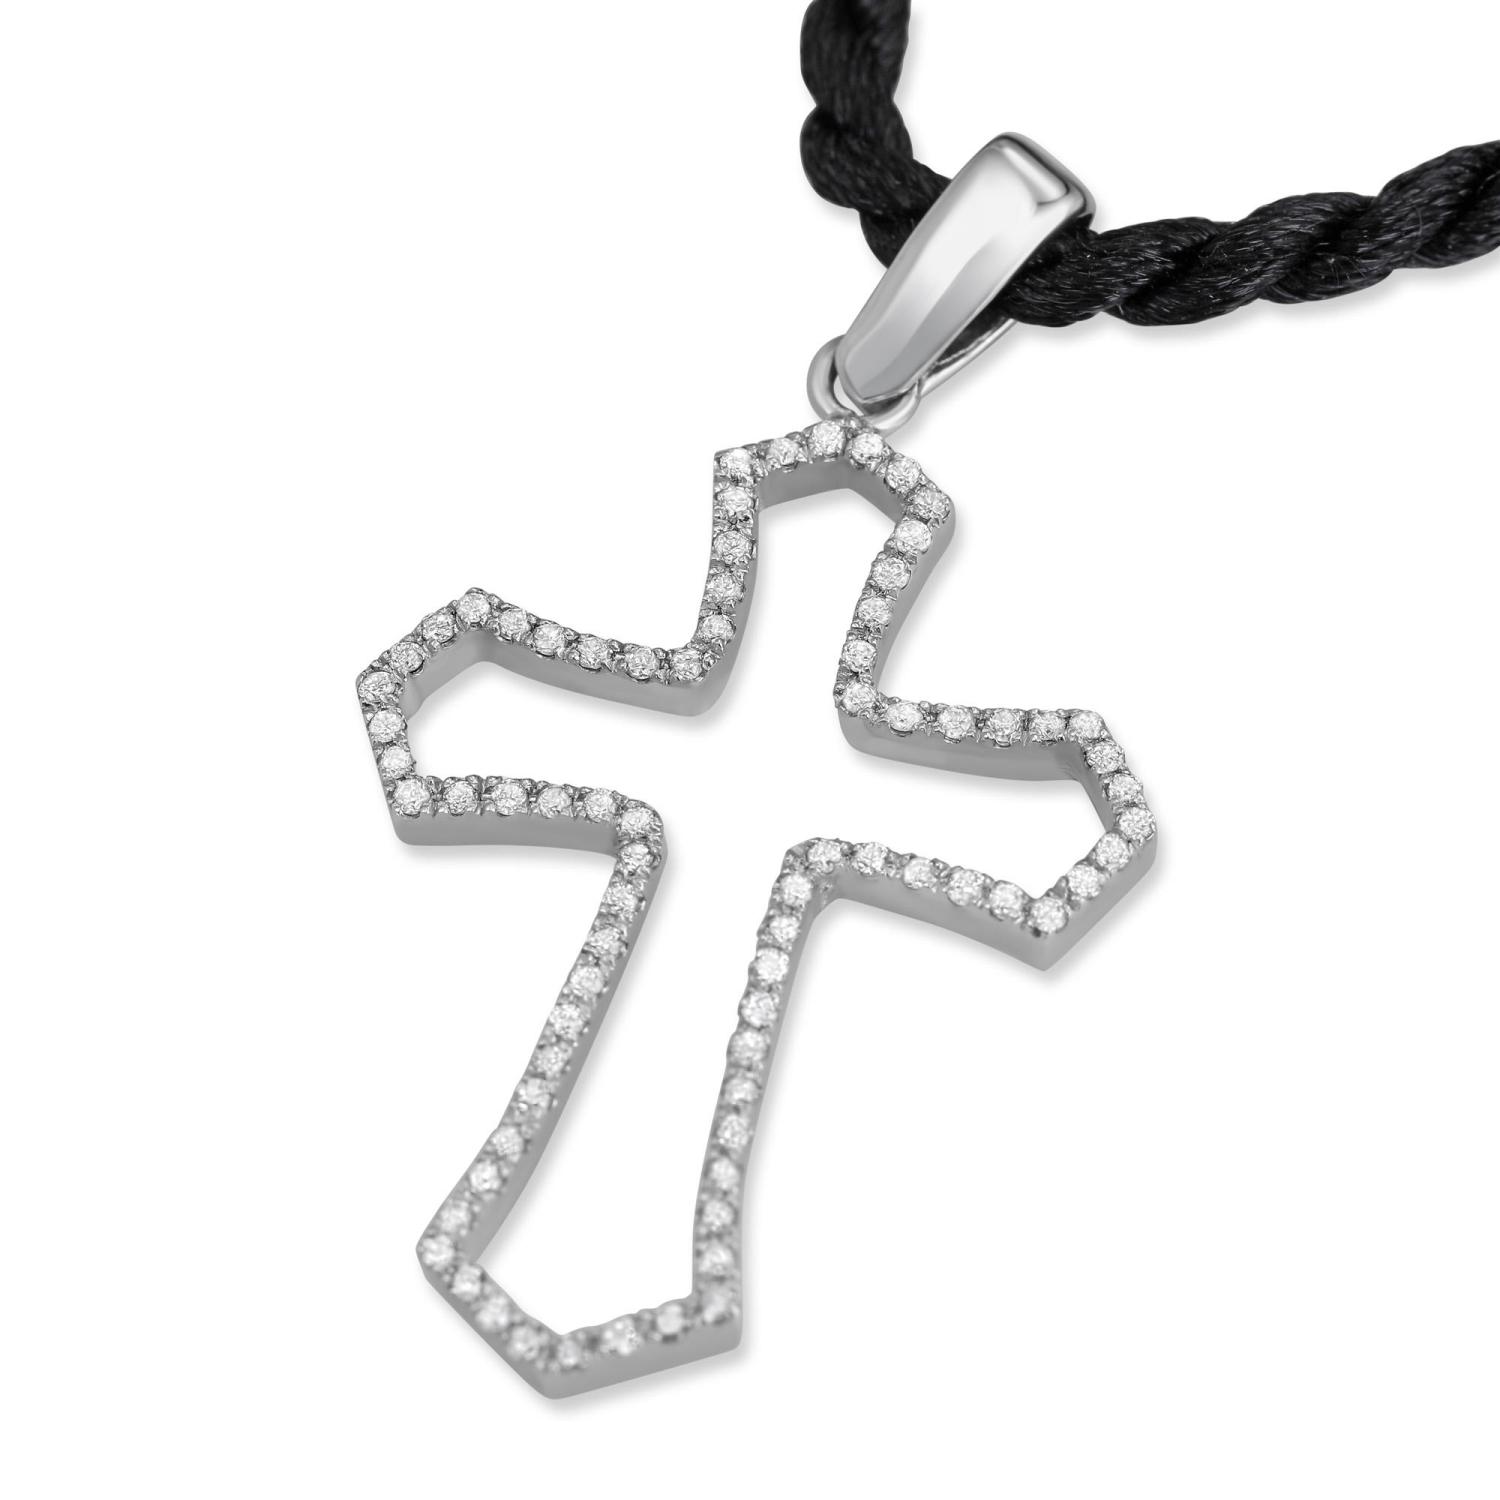 14K White Gold and Diamond Outline Passion Cross Necklace - 1